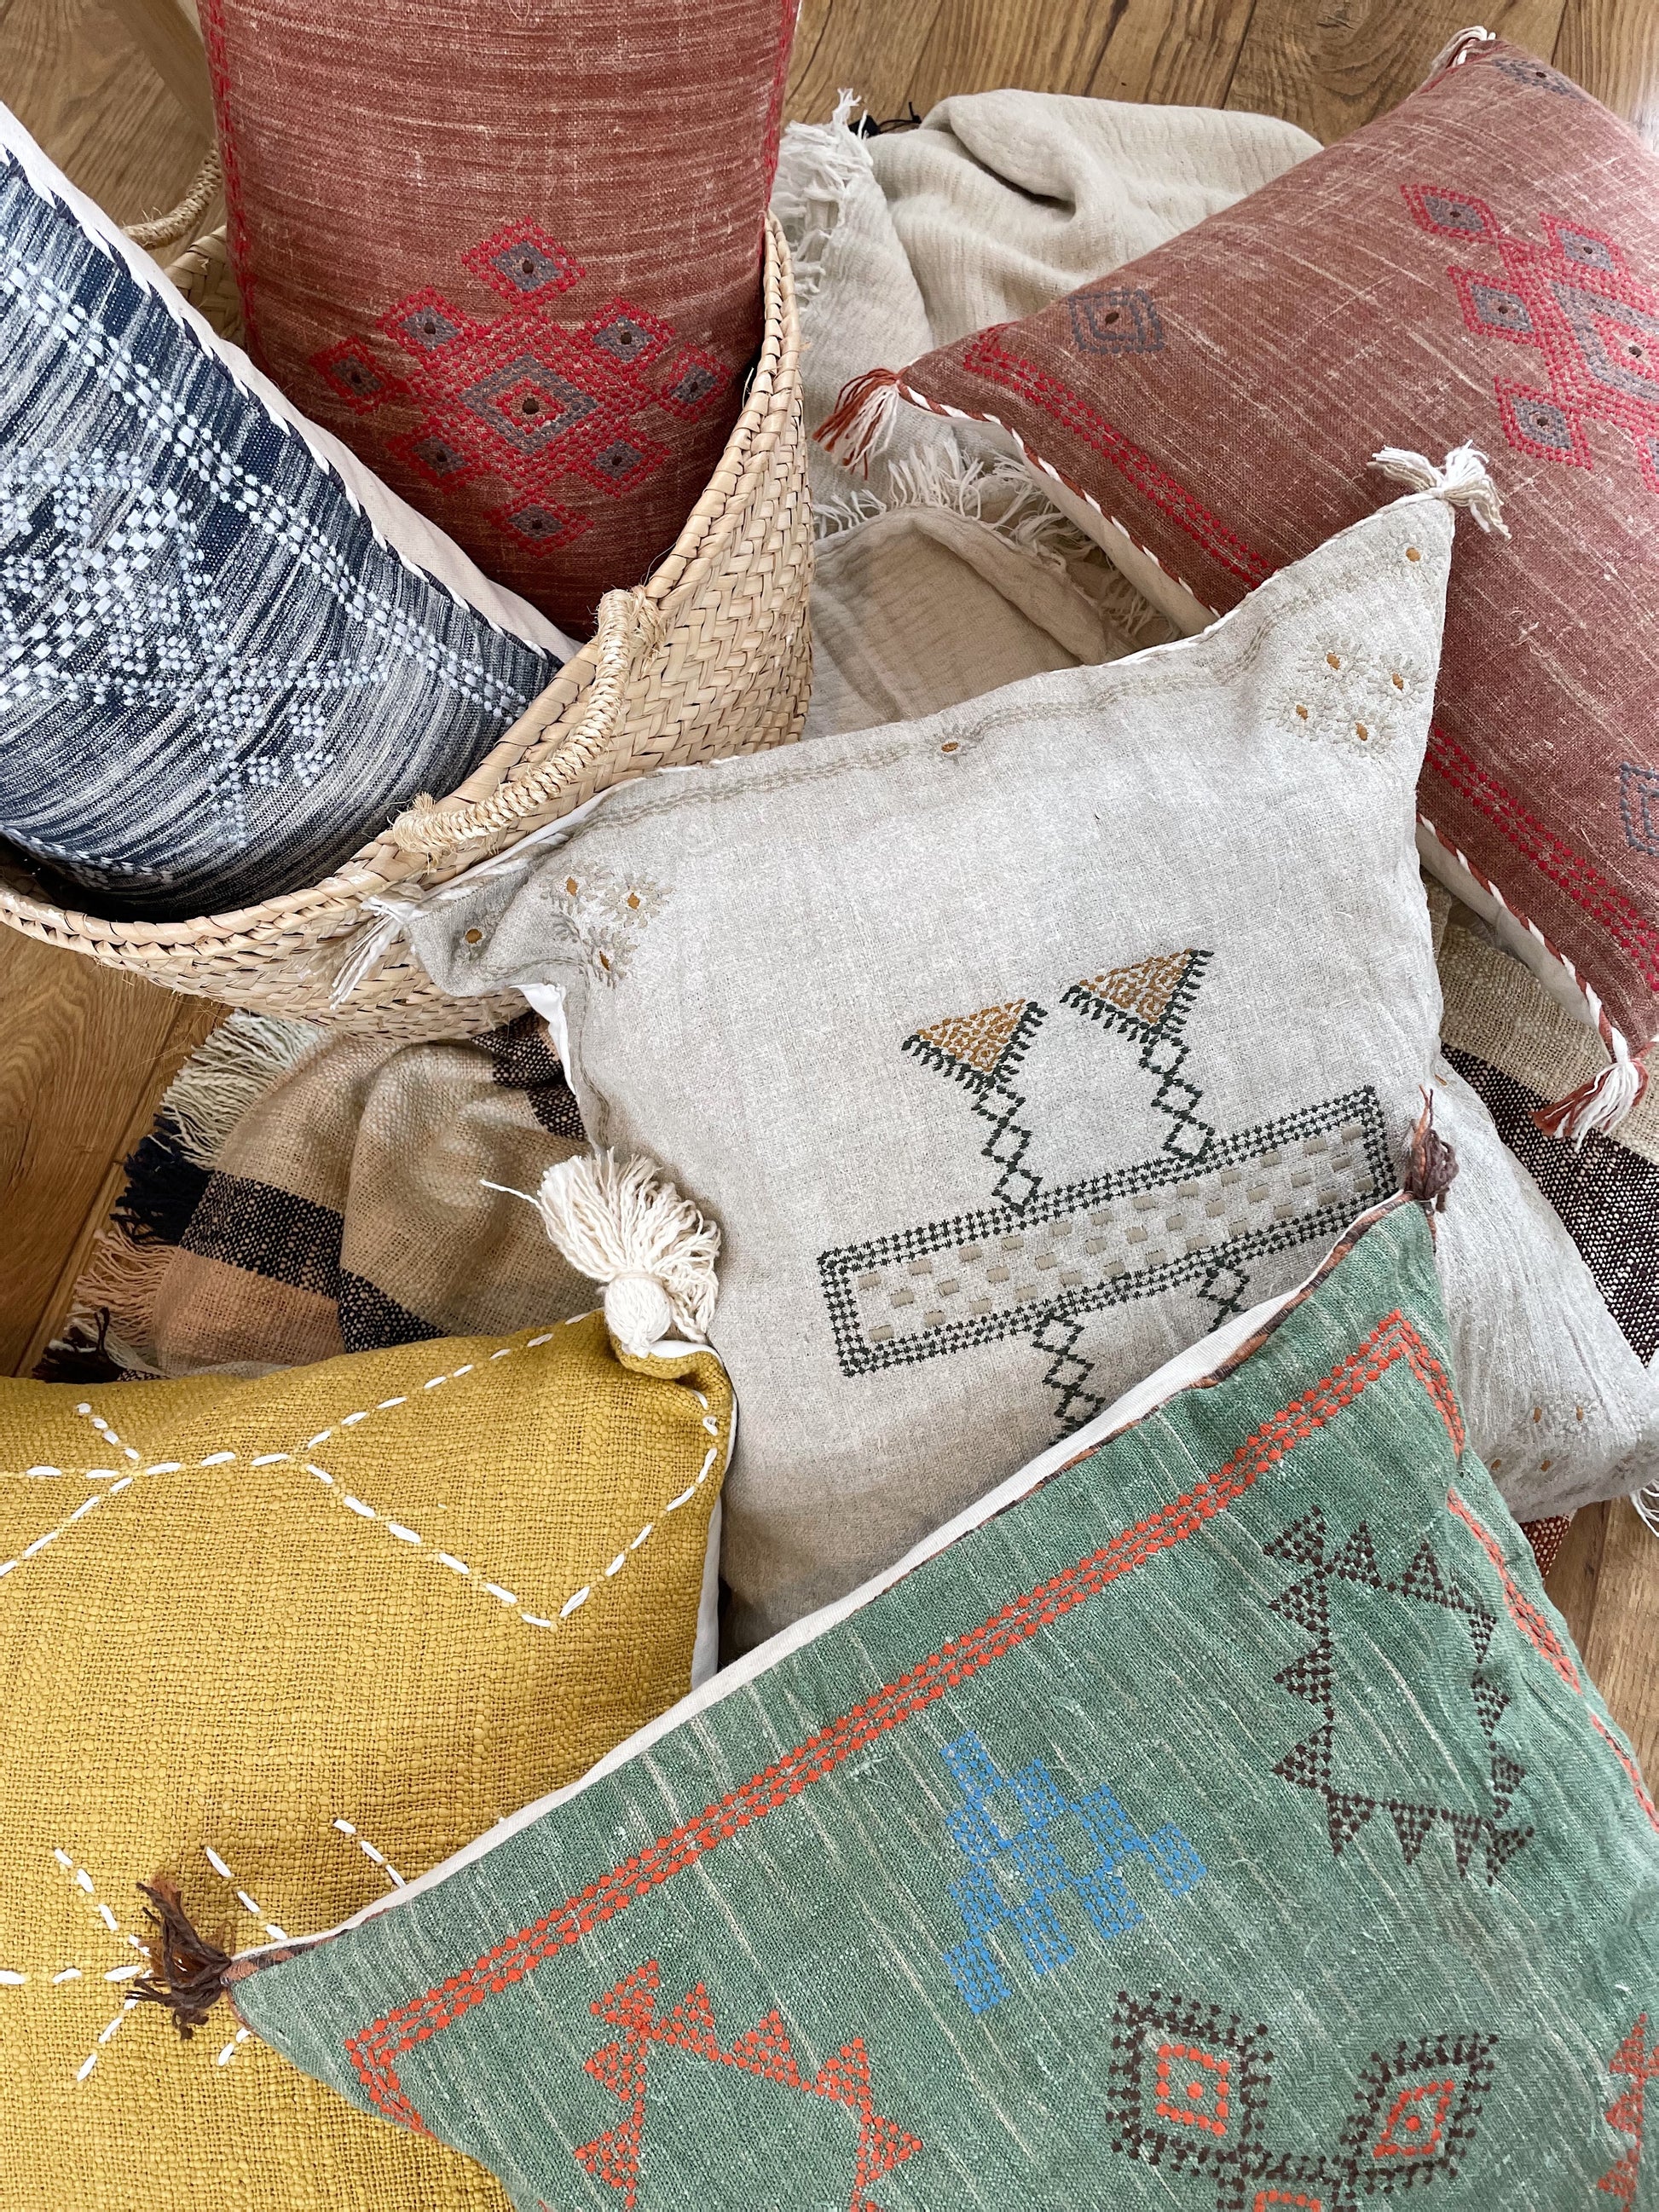 colourful embroidered cushions scattered together